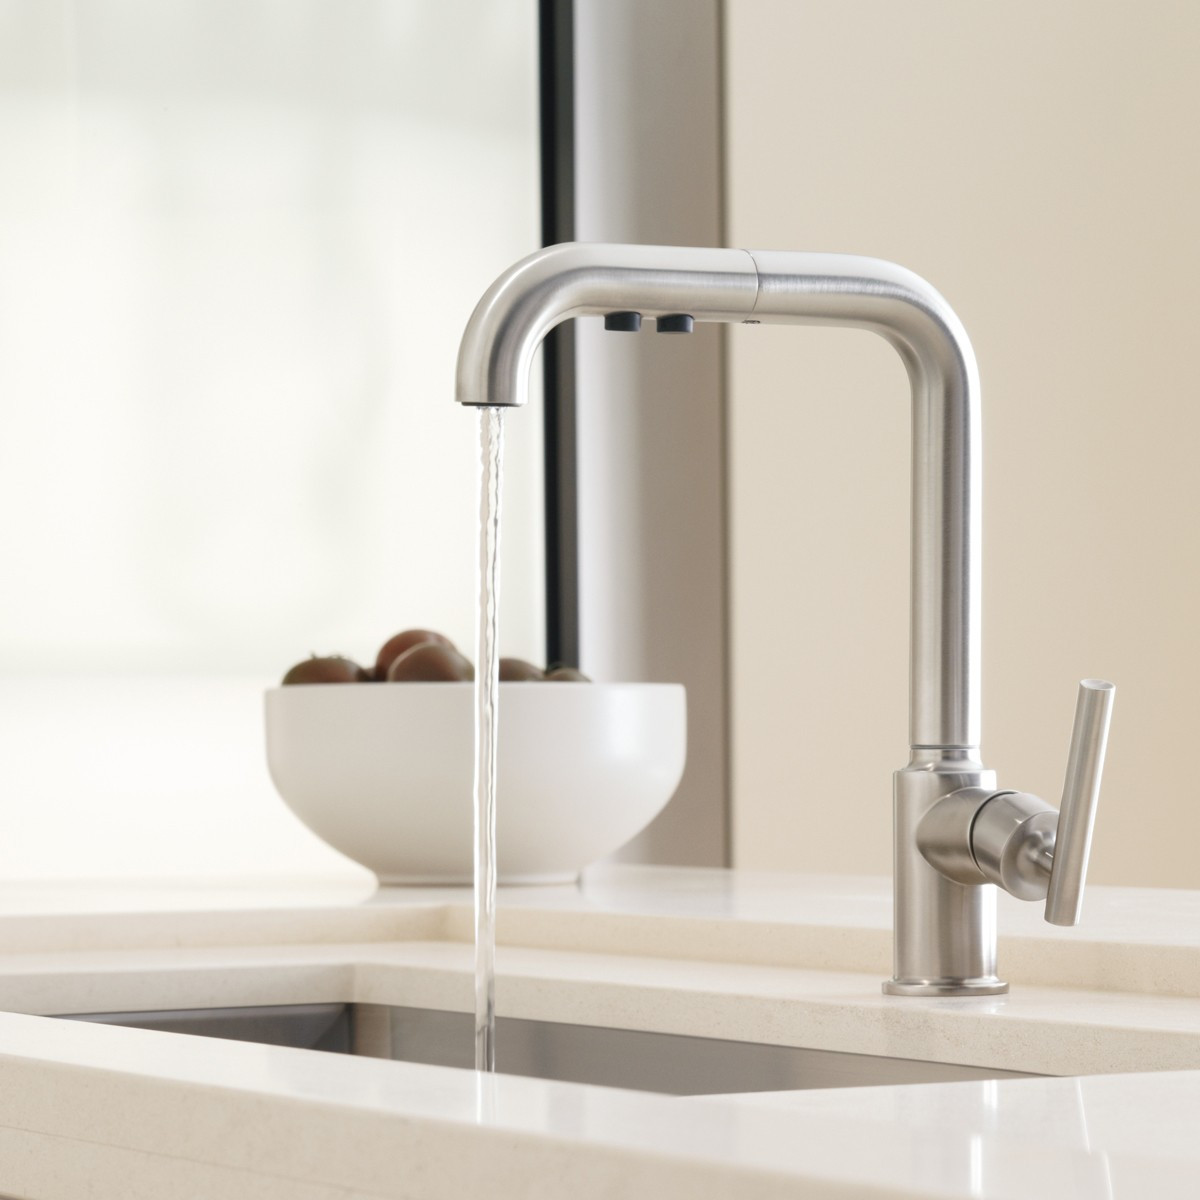 Modern Kitchen Faucets
 How to Choose A Kitchen Faucet